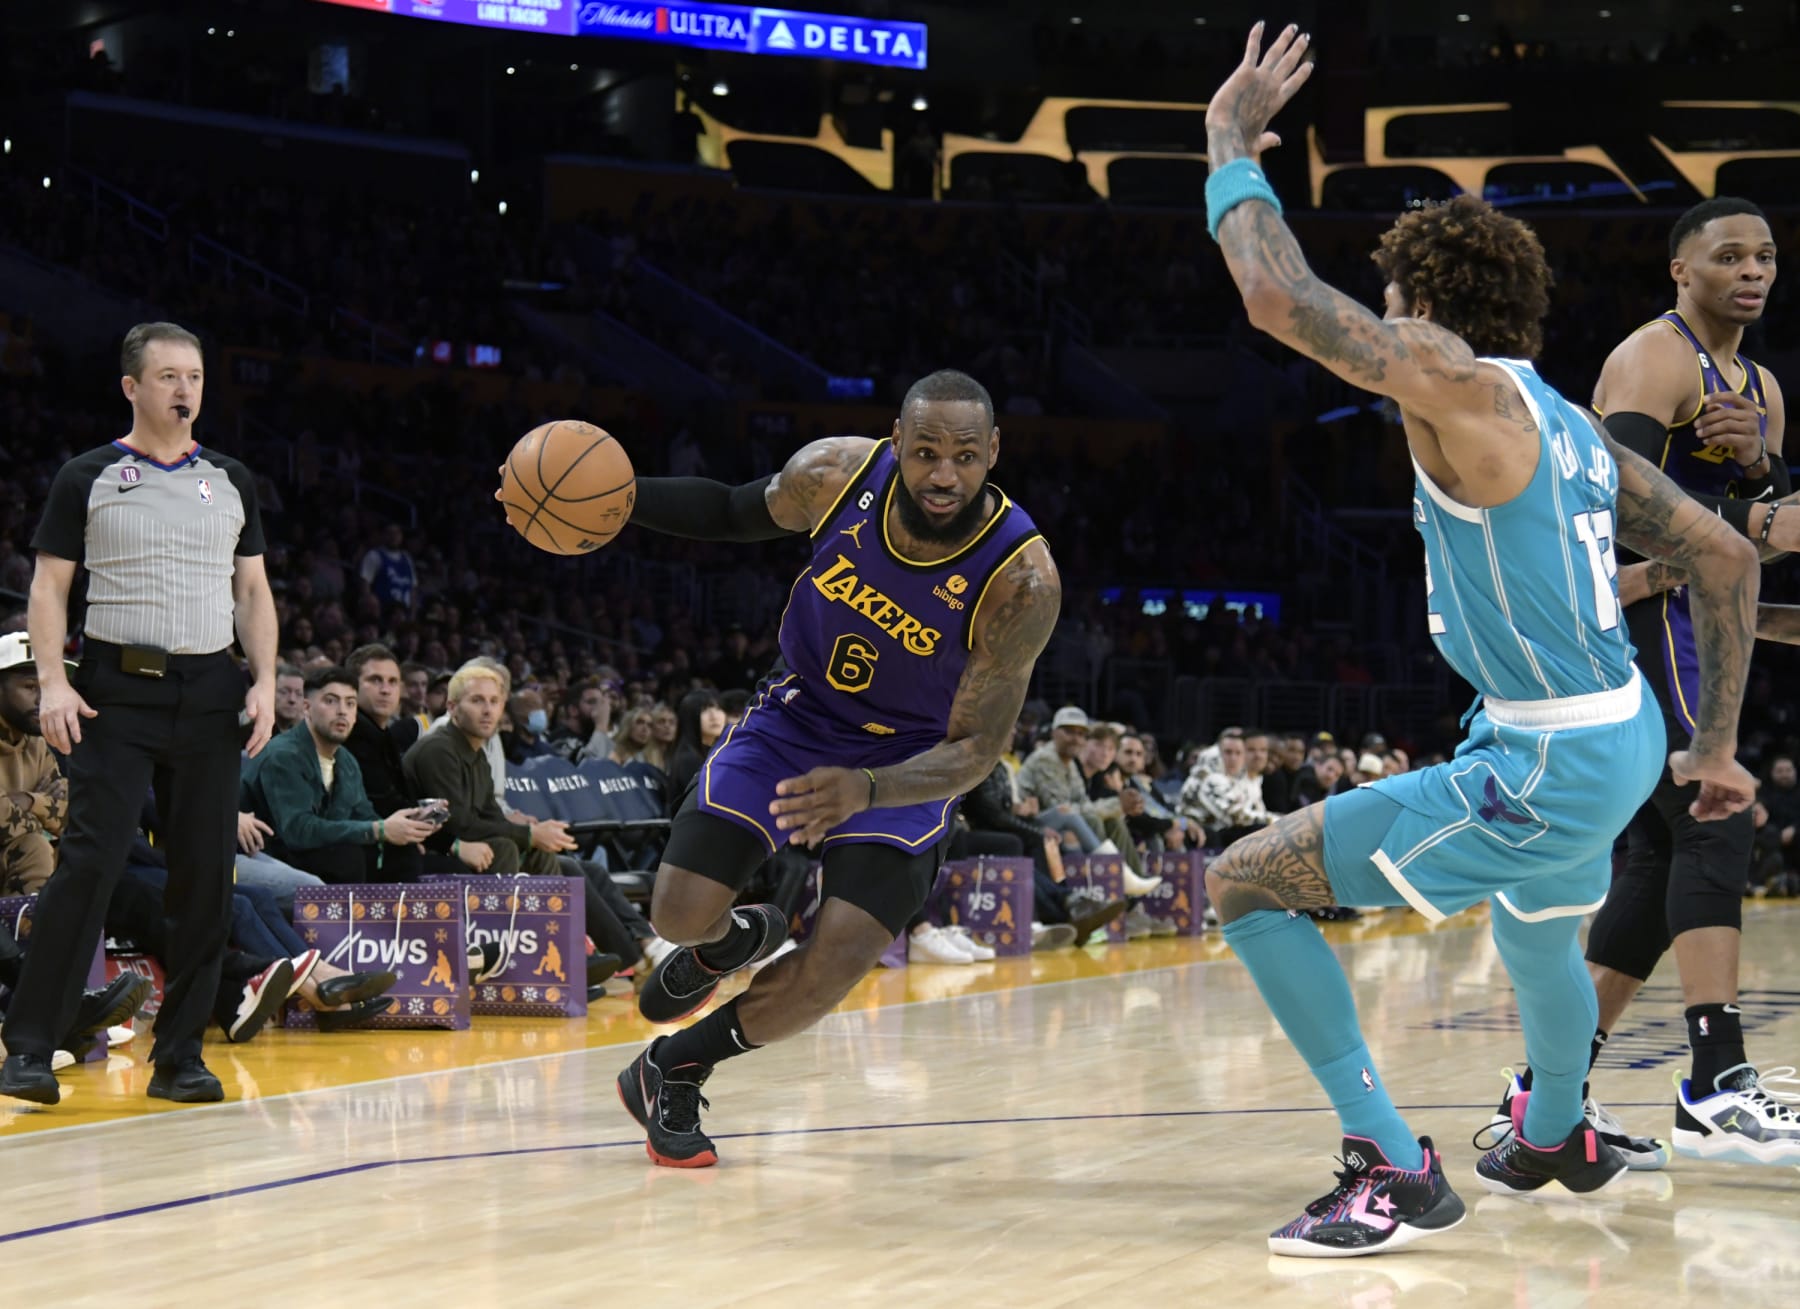 Lakers vs. Hornets Final Score: L.A. loses without LeBron James